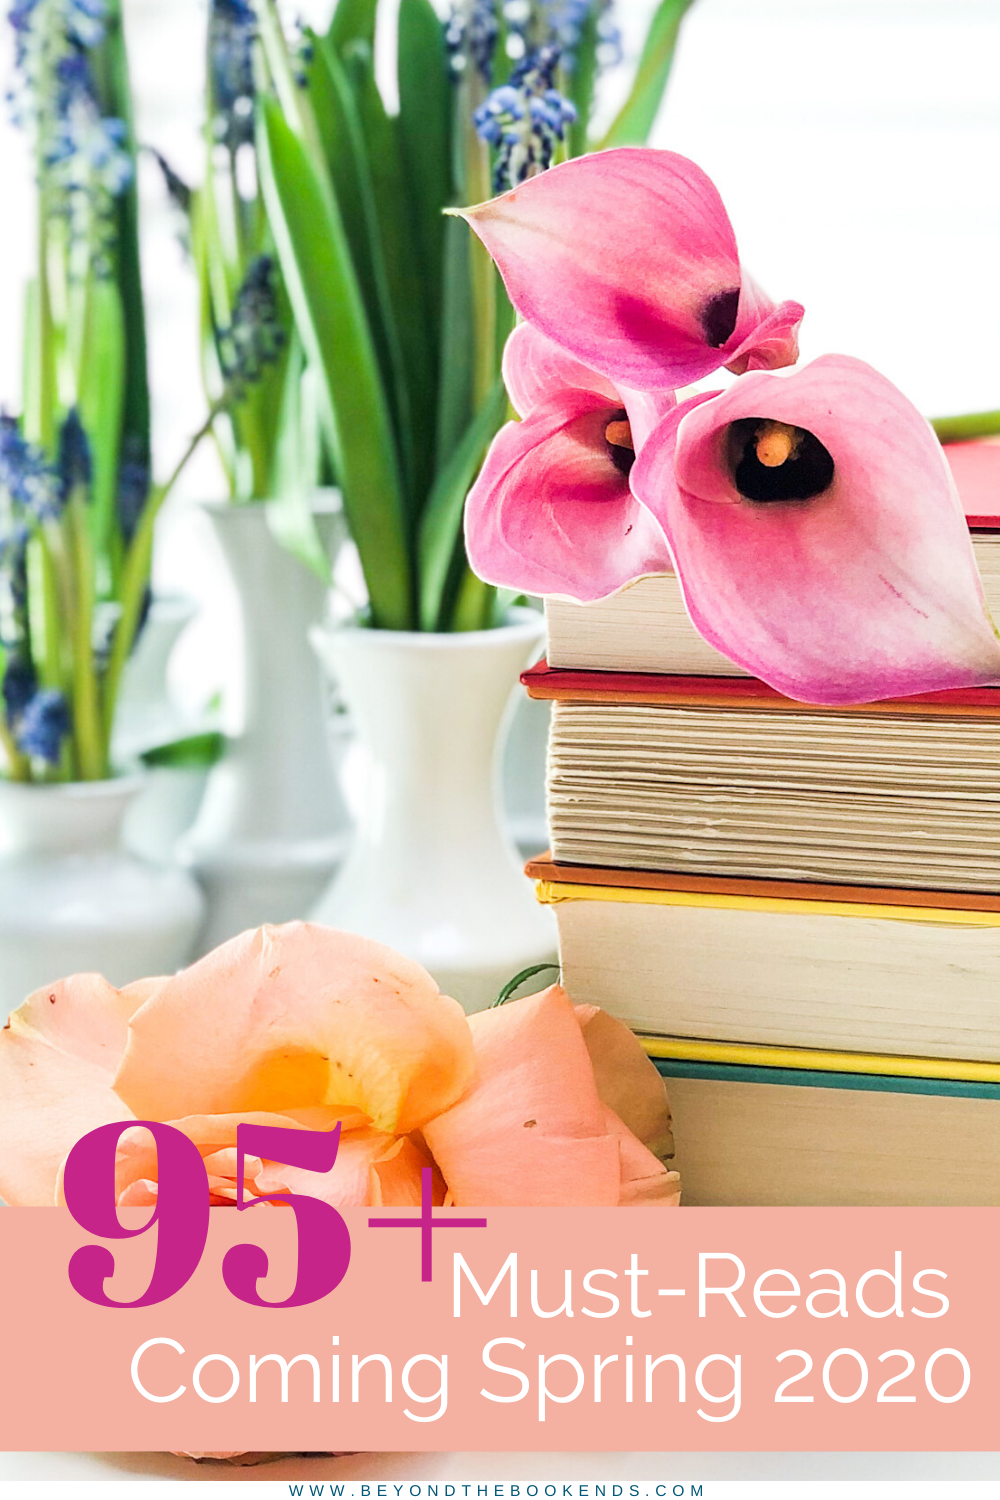 95+ new releases for spring 2020. New Books for April, May and June 2020. Stuck at home with nothing to do? We have all the great books that you can look forward to reading in the next few months.